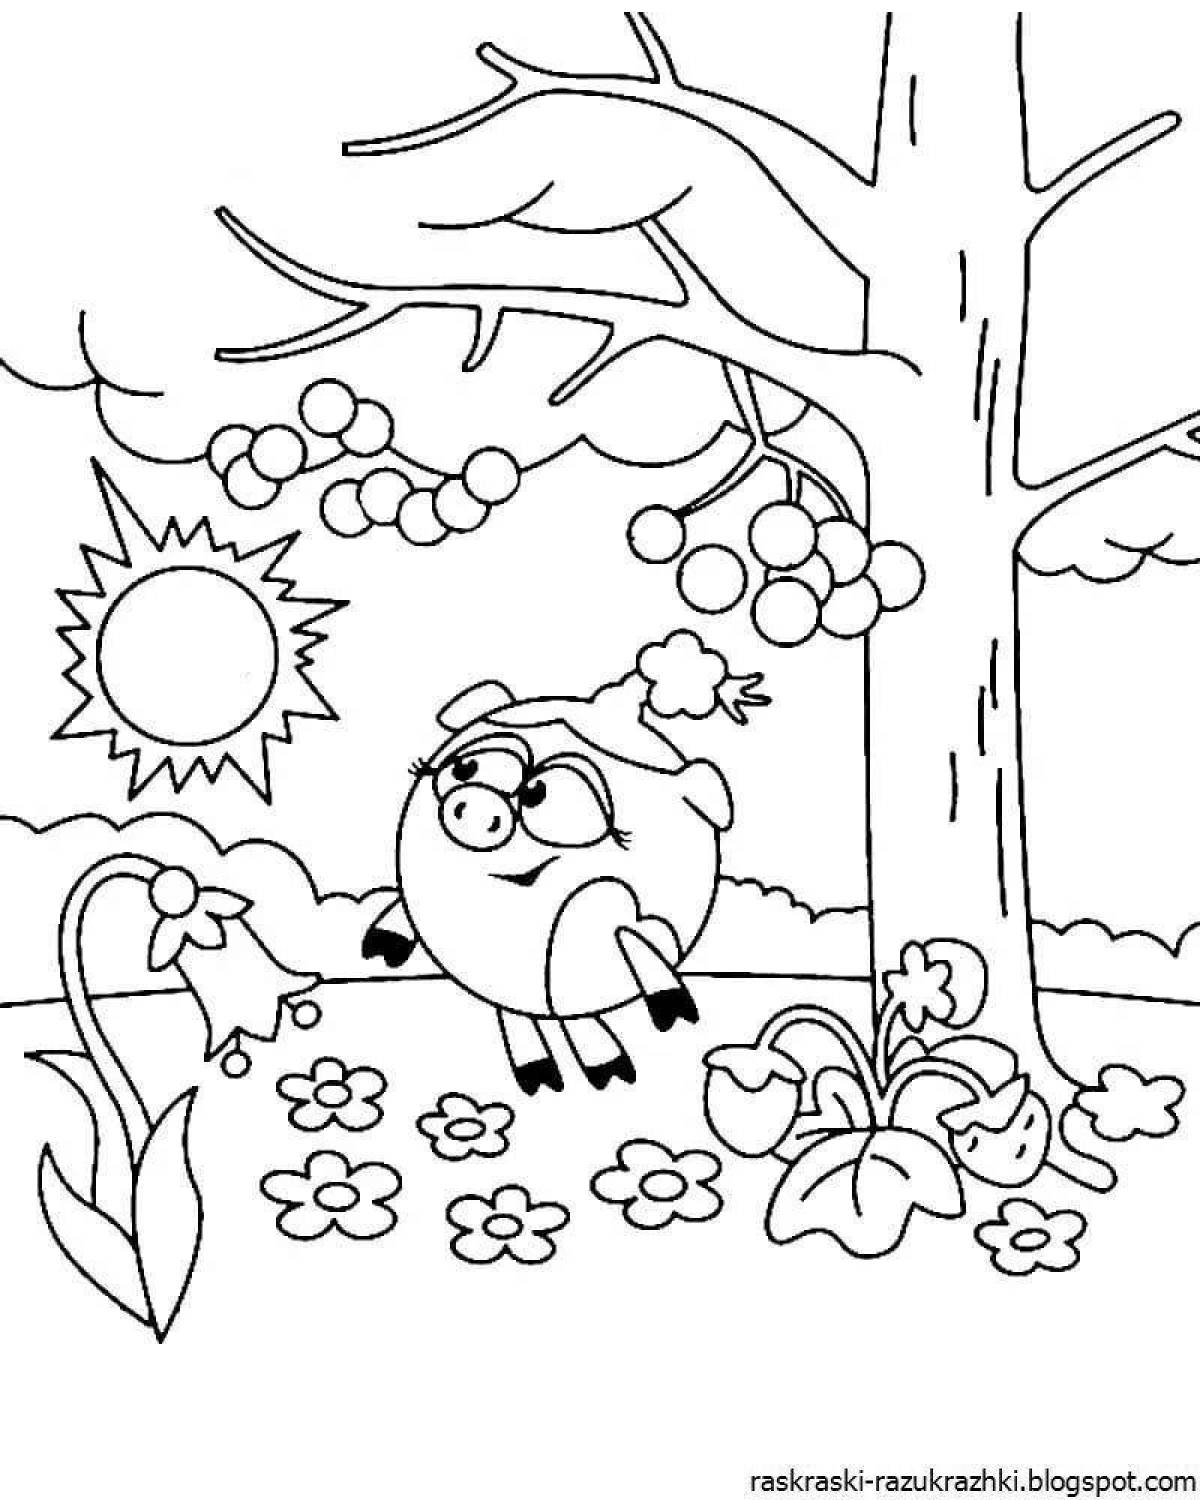 Colorful Smeshariki coloring pages